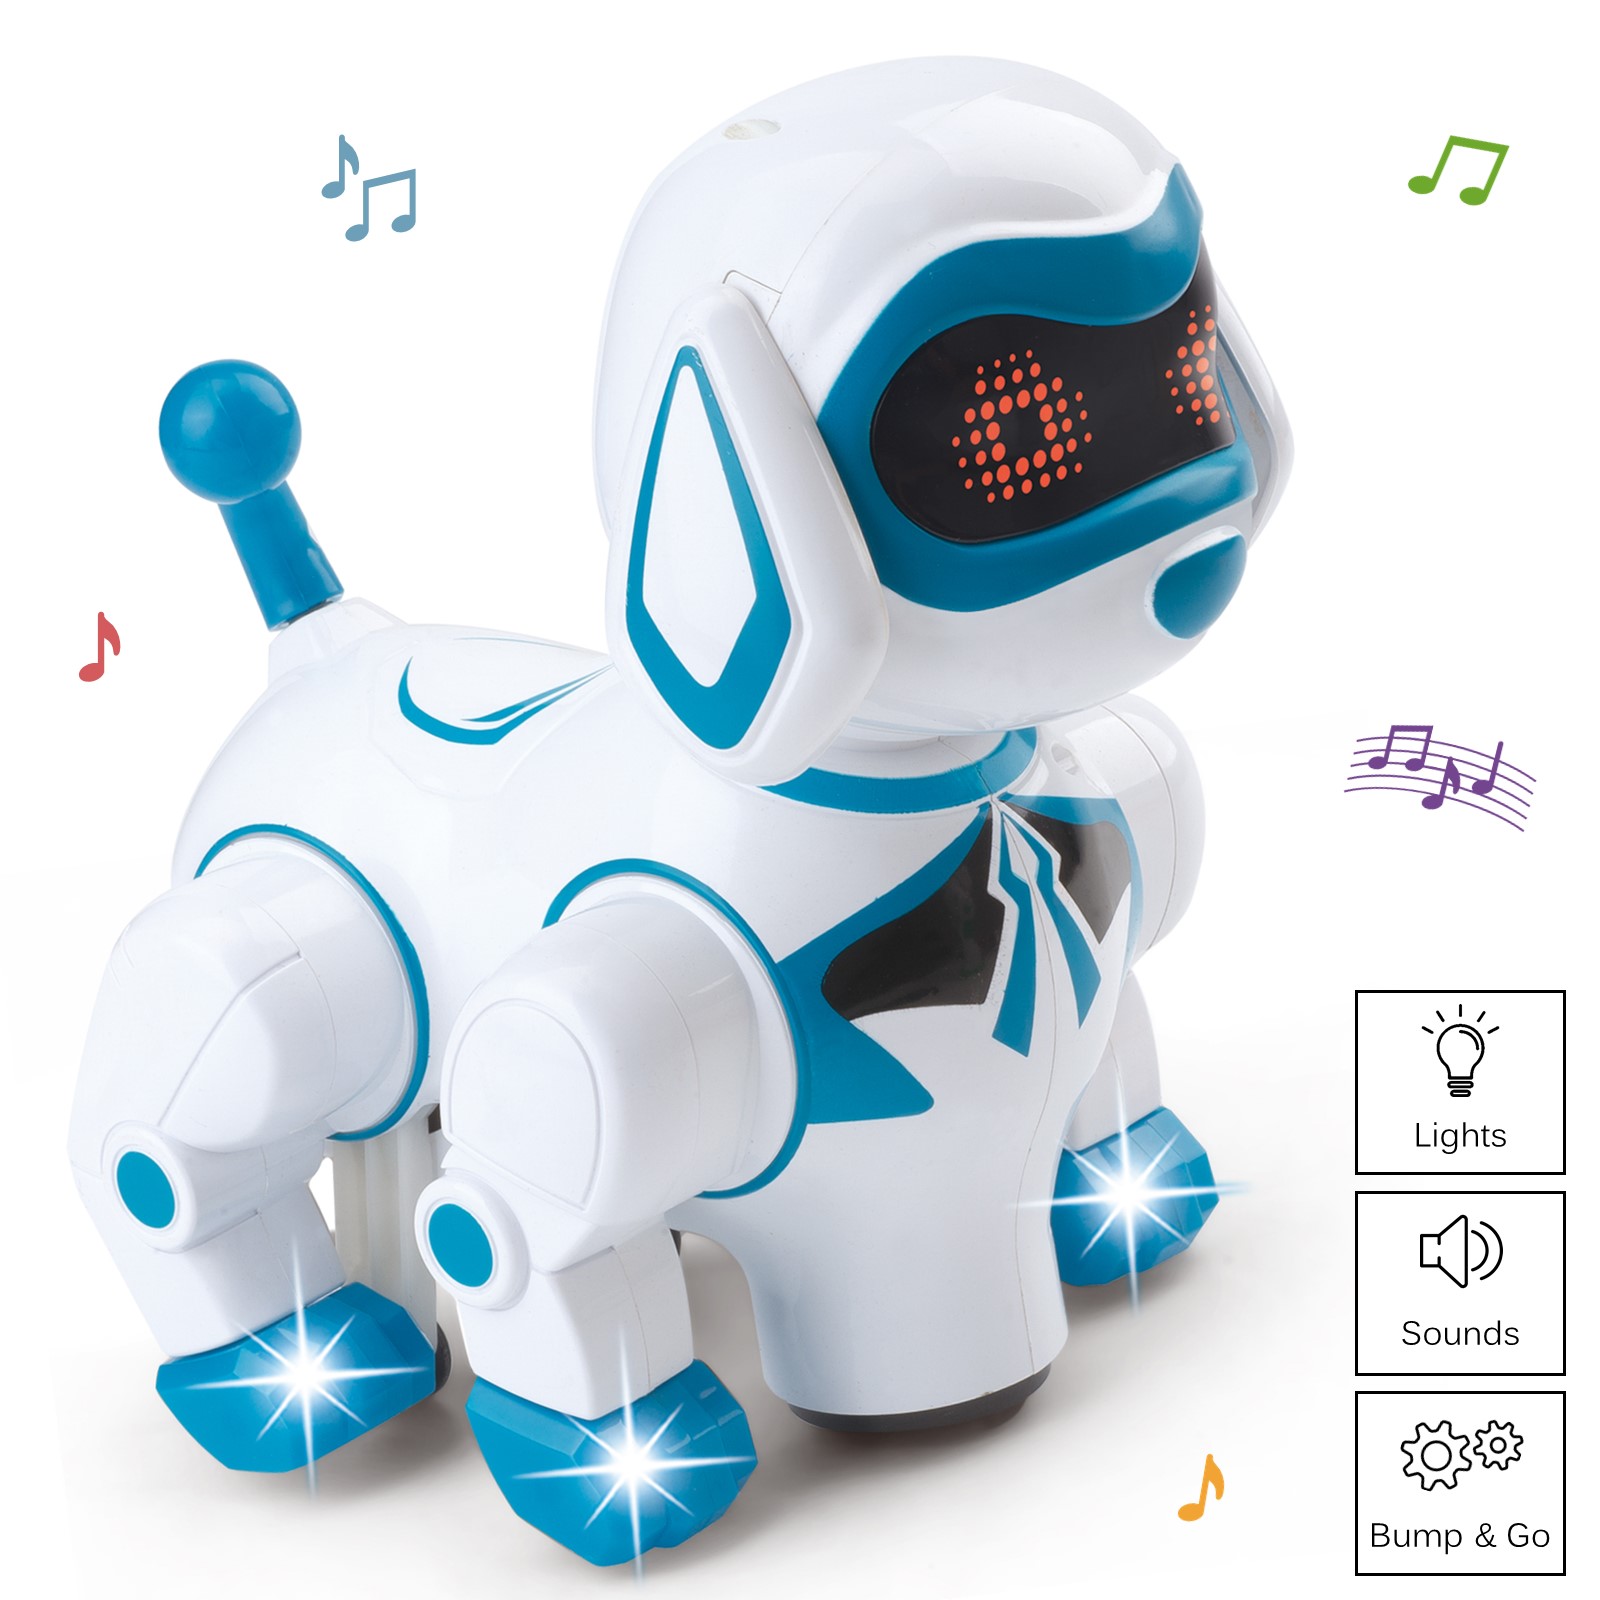 Vokodo Pet Robotic Dog Interactive Kids Toy Puppy Walks Barks Sits With Lights And Music Friendly Electronic Robot Companion Bump And Go Action Play Great Gift For Preschool Children Boy Girl Toddlers